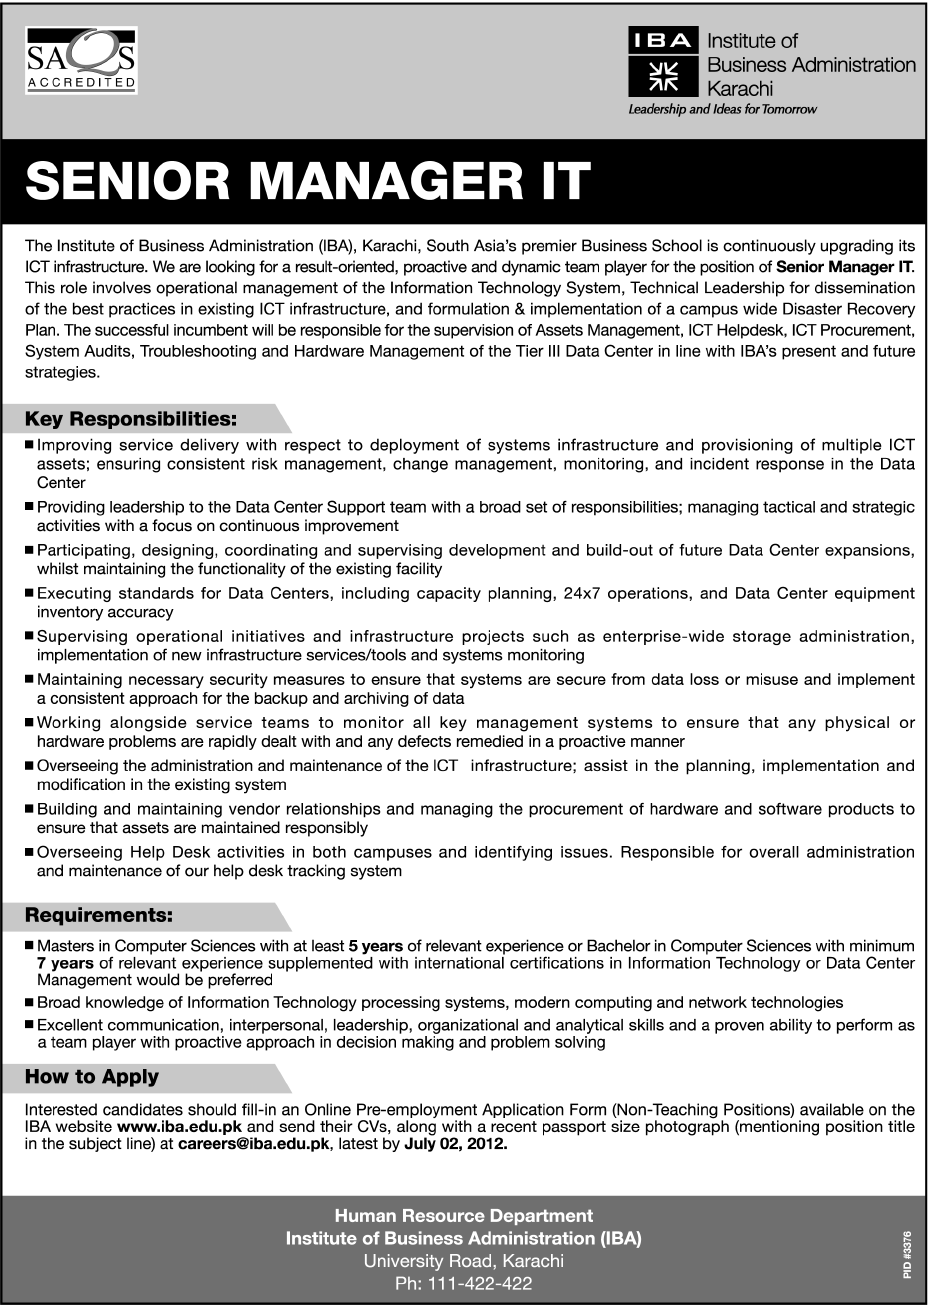 Senior Manager IT Required at IBA Institute of Business Administration